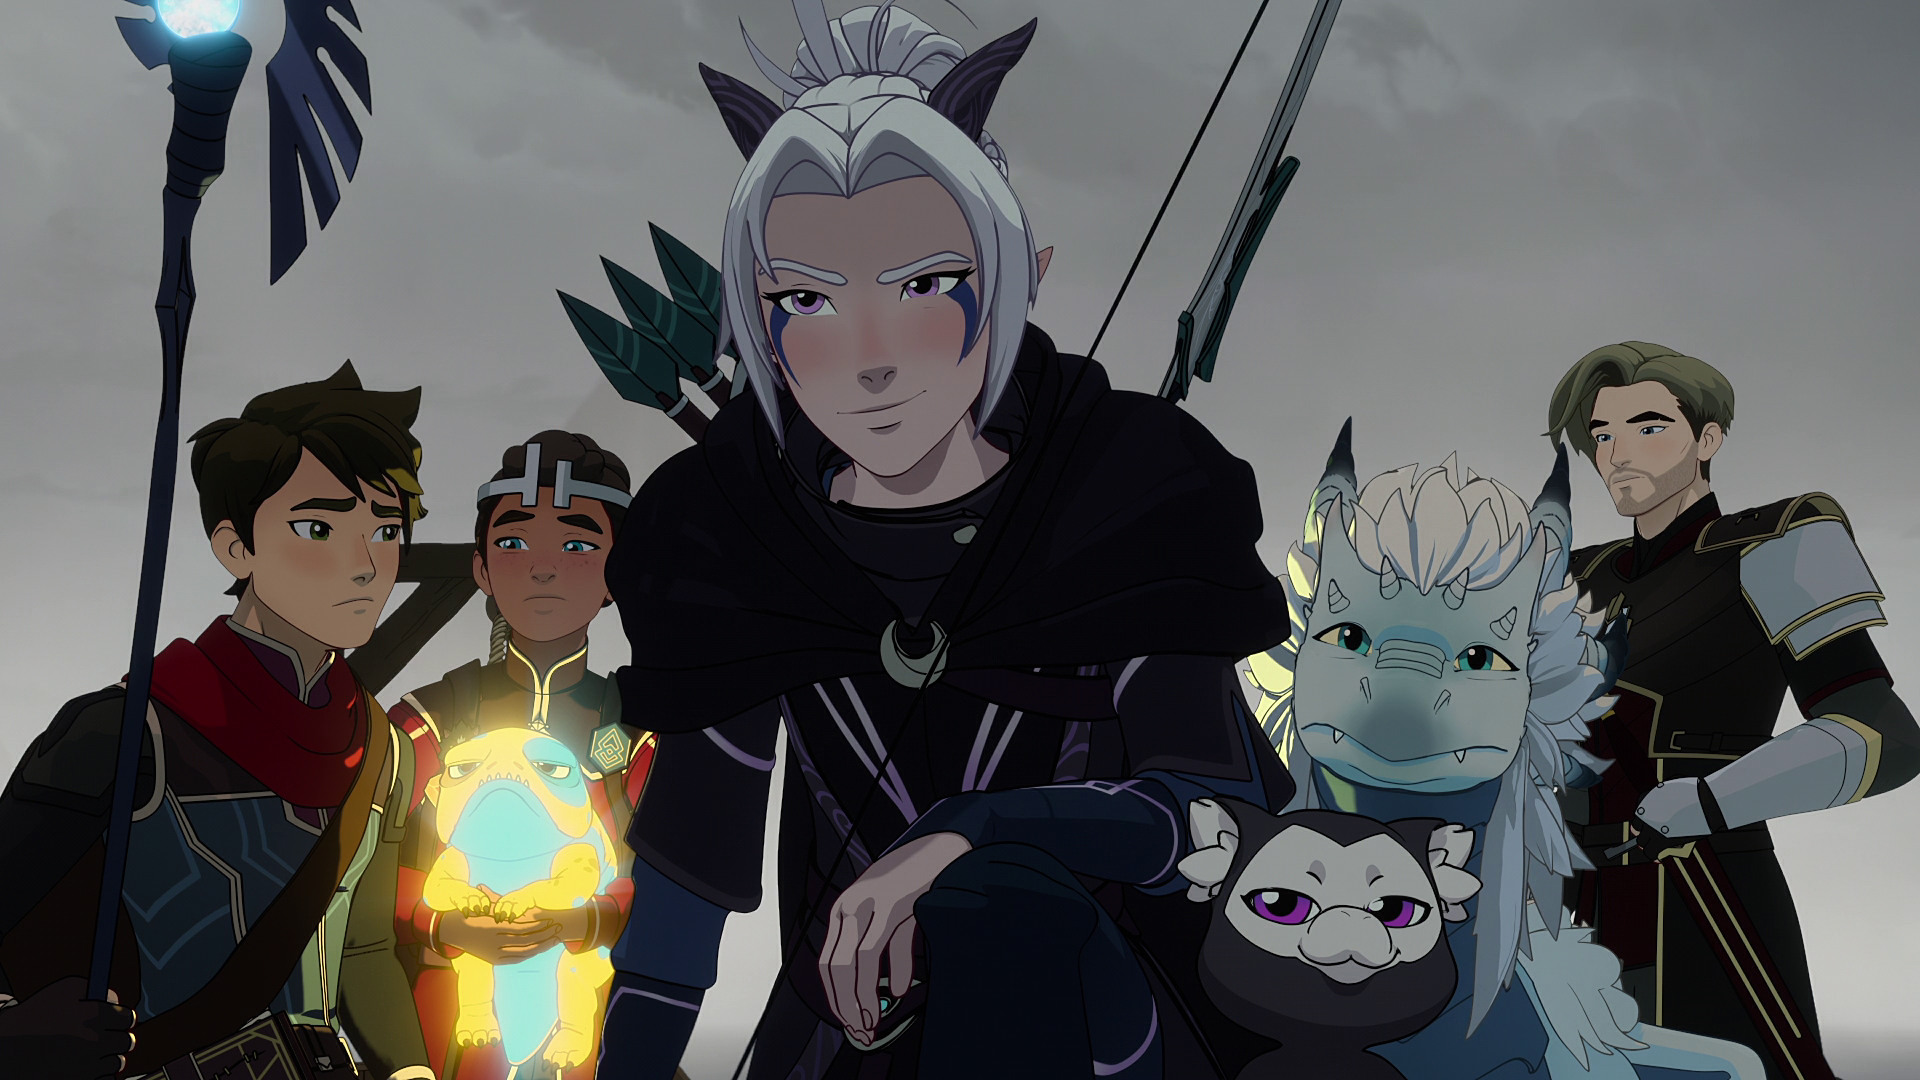 A white-haired elf assassin smirks as she kneels down, a band of adventurers including a mage, a king, and a knight (along with a little dragon) standing behind her.